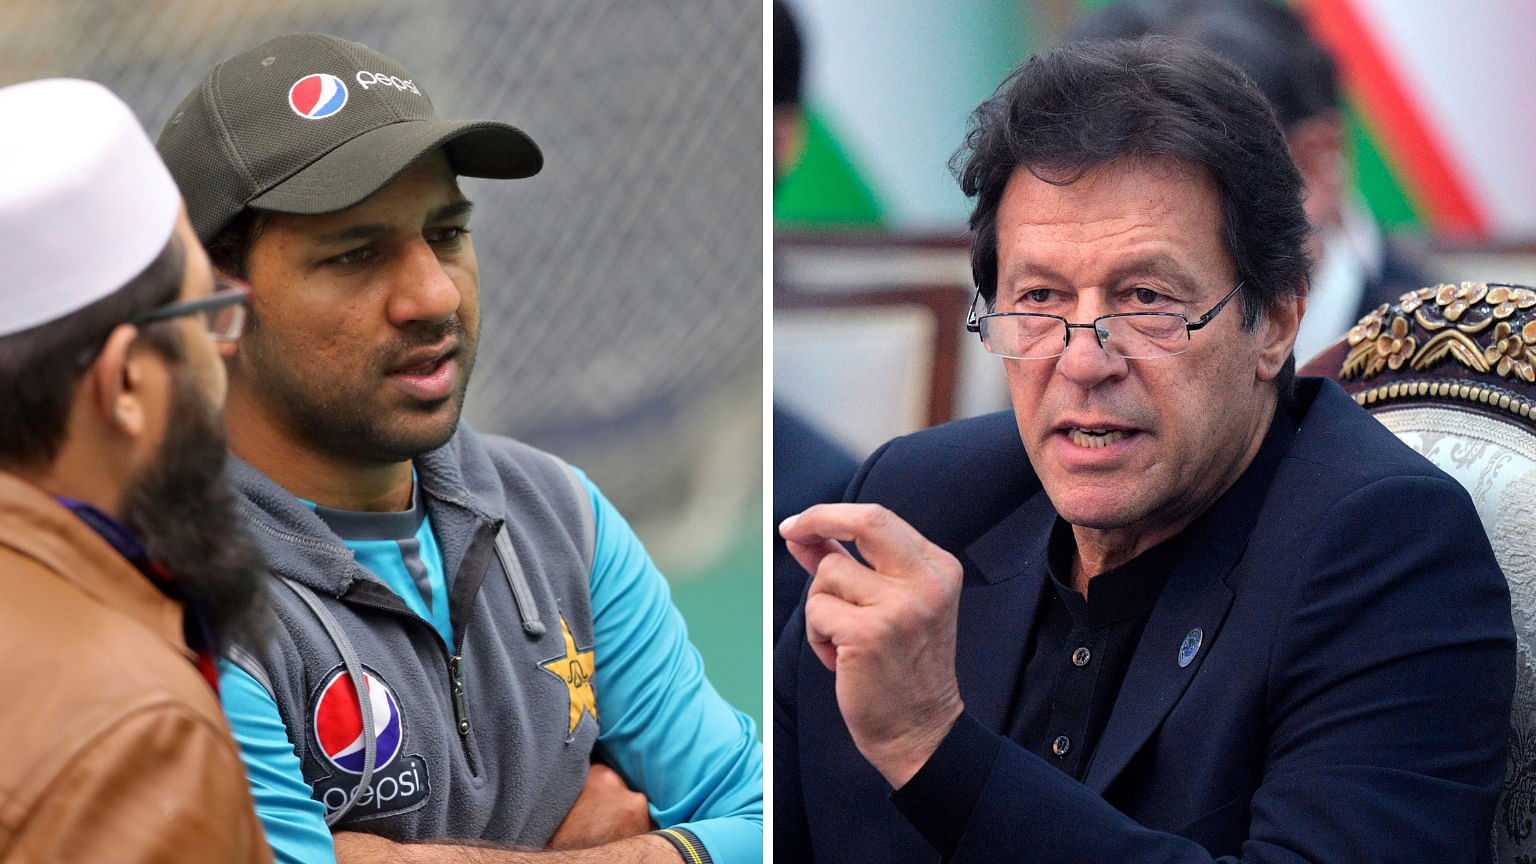 Imran Khan described Sarfaraz Ahmed as a “courageous captain” and asked to give best against the arch-rivals.